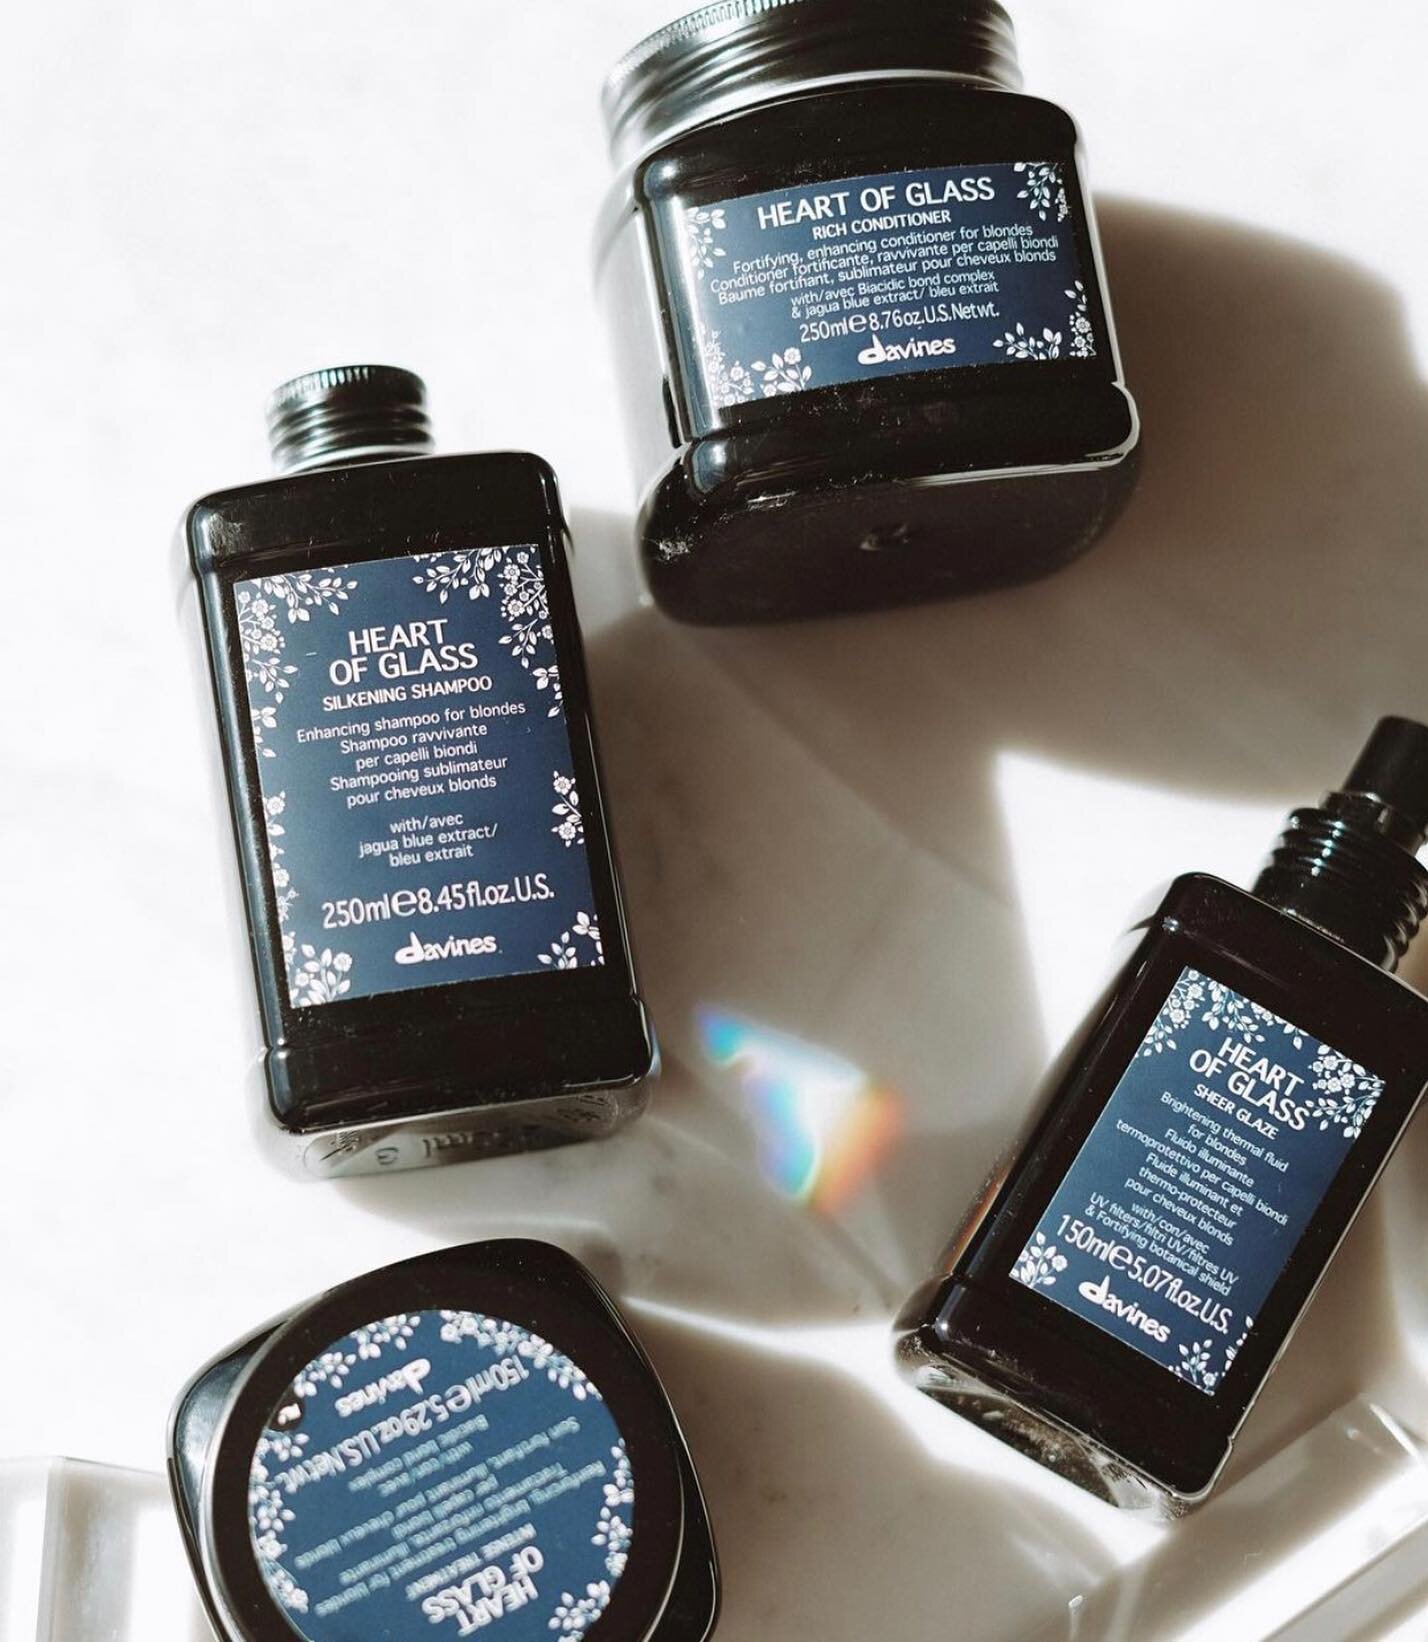 ATTENTION BLONDIES! We are OBSESSED with this new Davines product line and you will be too! HEART OF GLASS is designed to highlight the beauty of your blonde✨it&rsquo;s unique indigo blue color will help steer cool tones away from warm hues, and prev